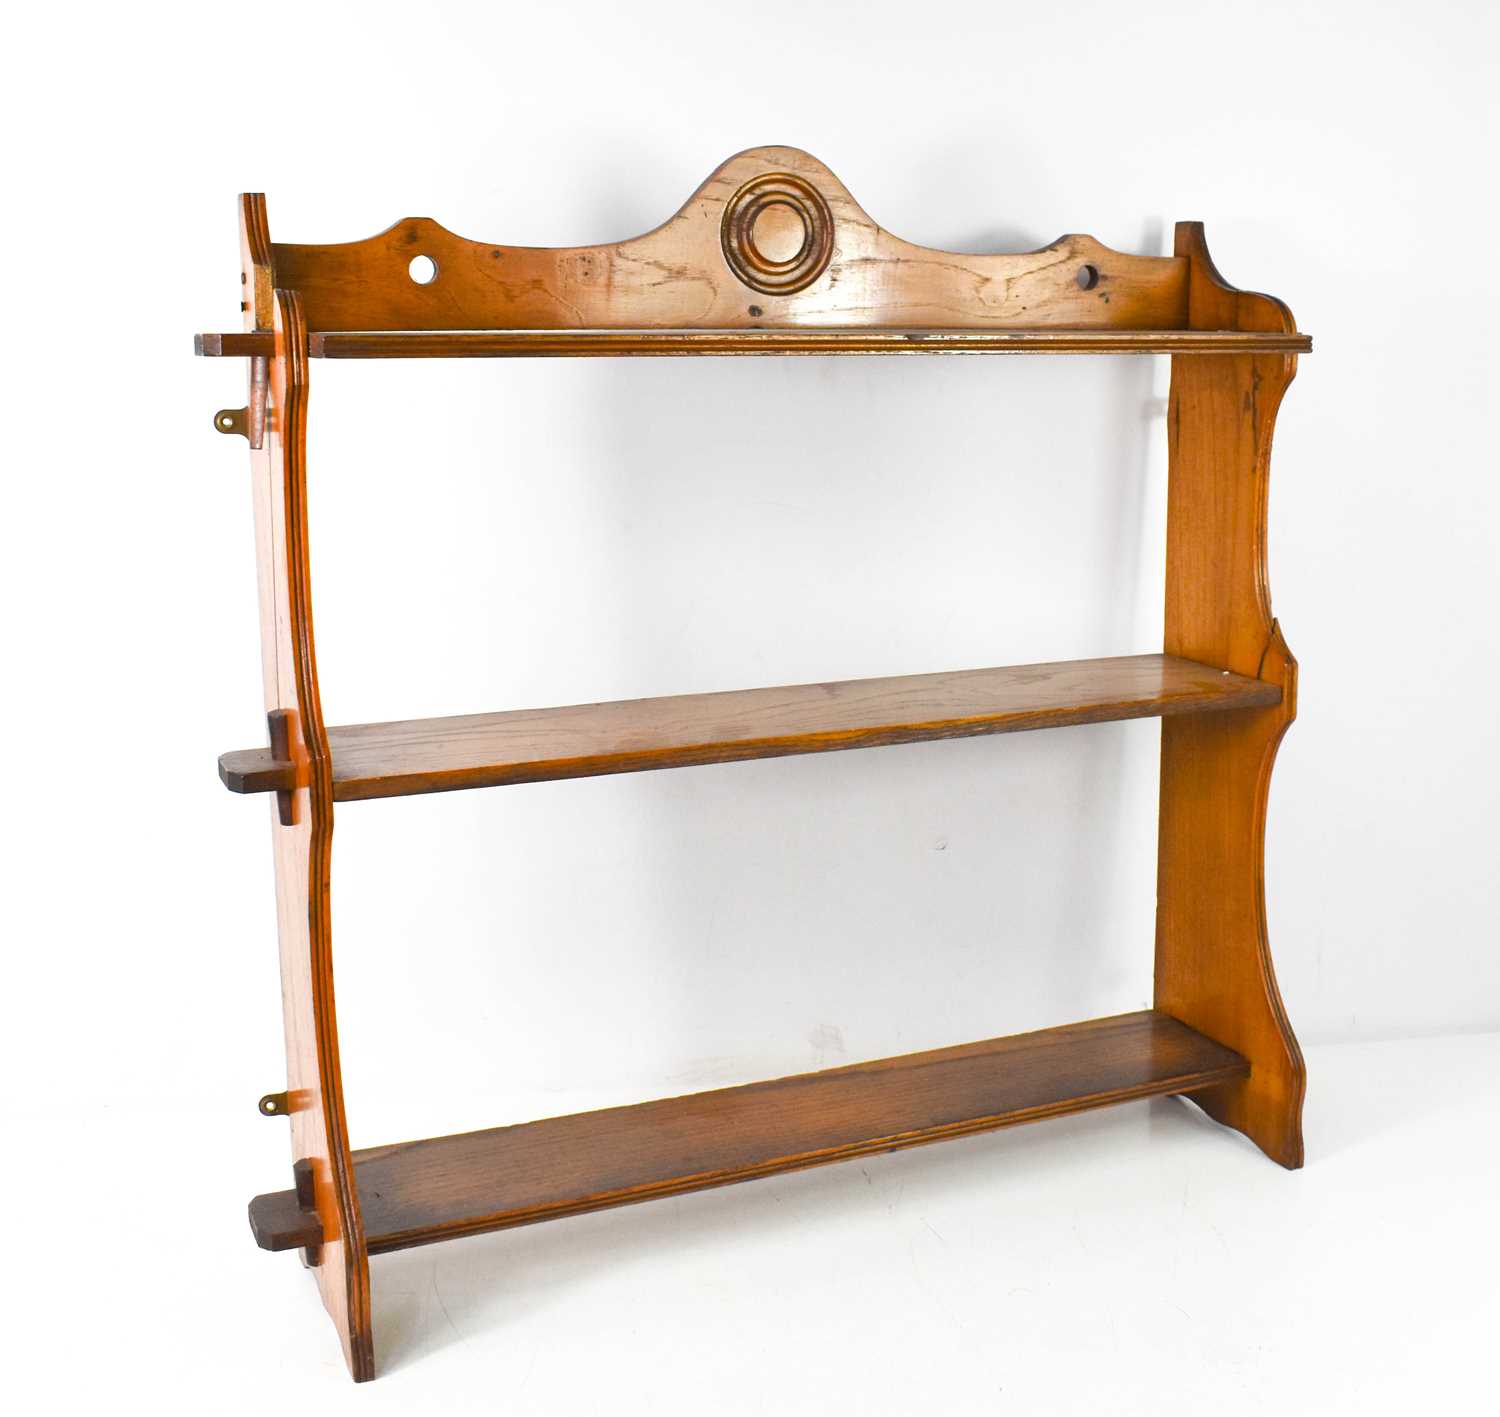 A 19th century fruitwood wall shelf, composed of a shaped and roundel carved top rail and two shaped